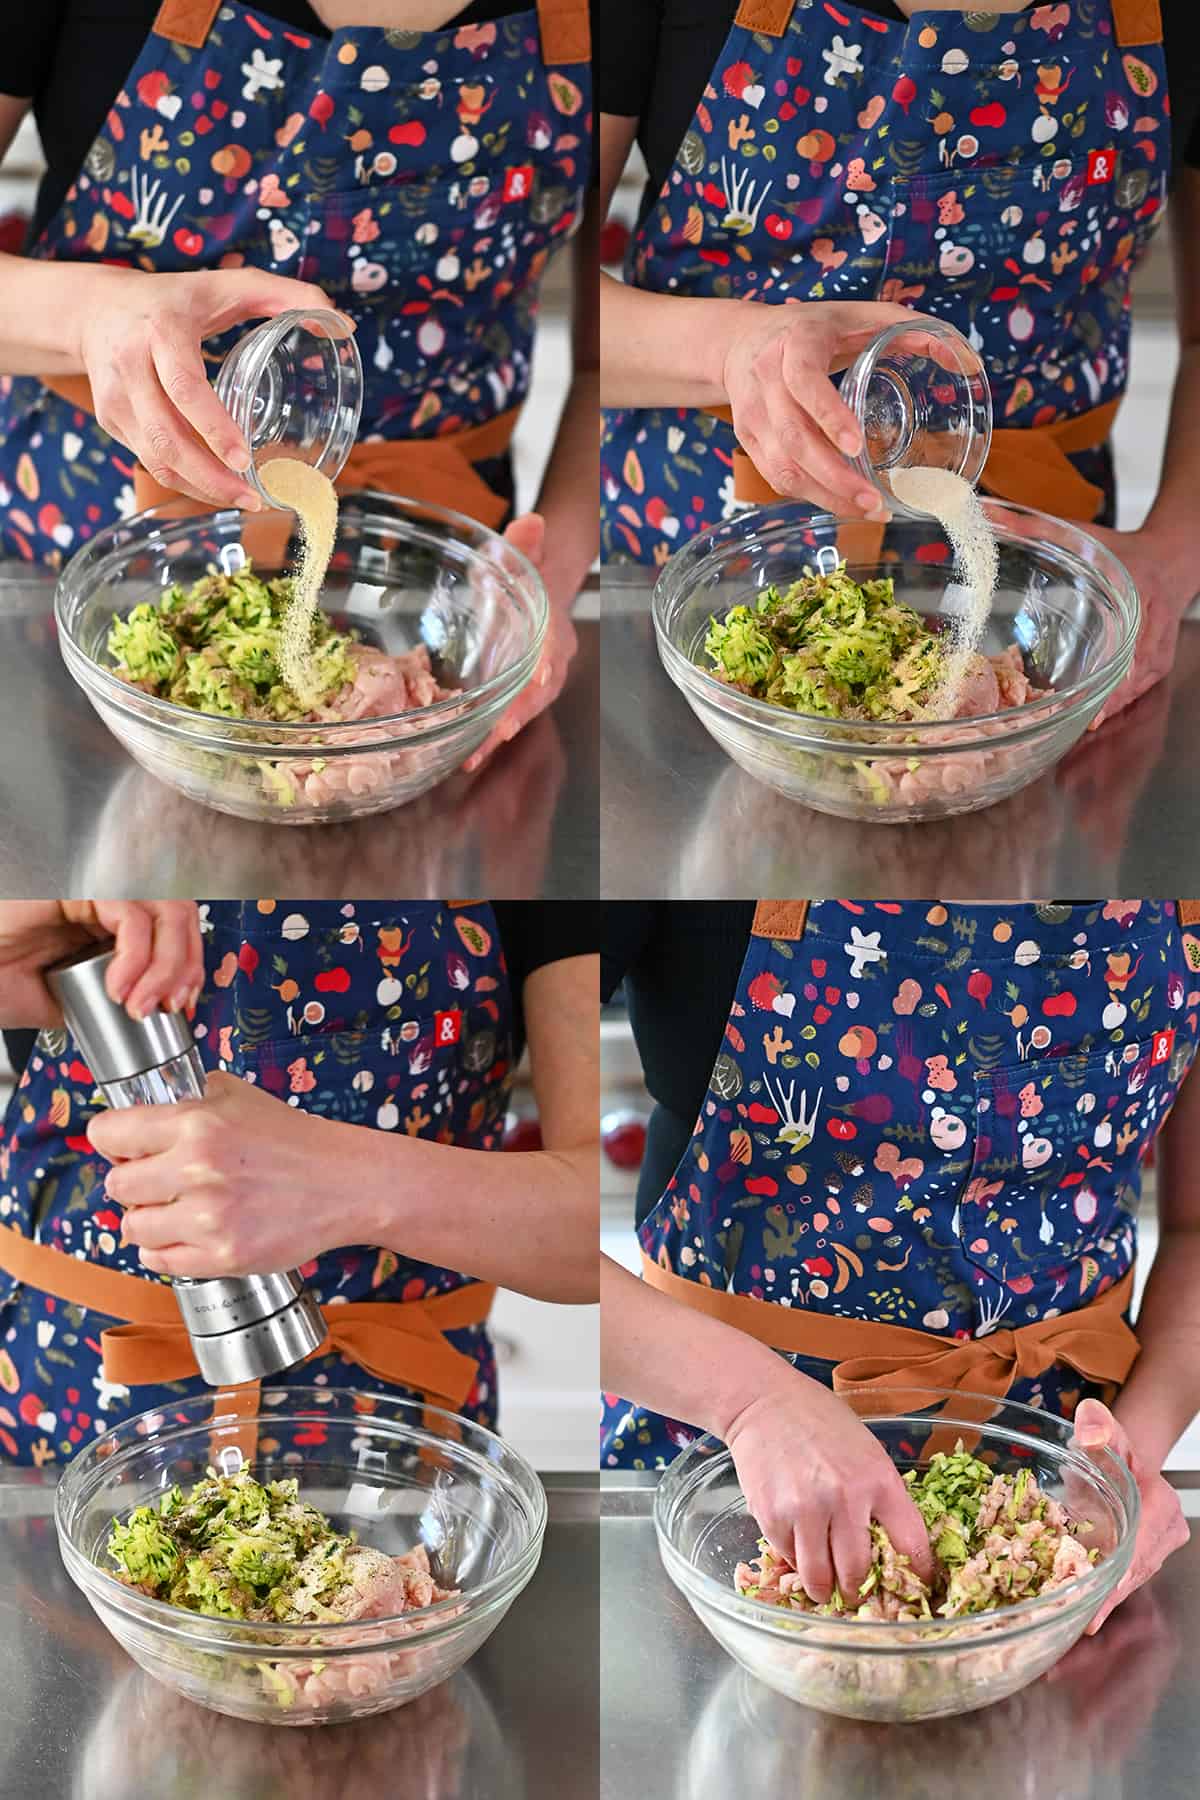 A person in a blue apron is adding the raw ingredients for chicken meatballs into a large glass mixing bowl.